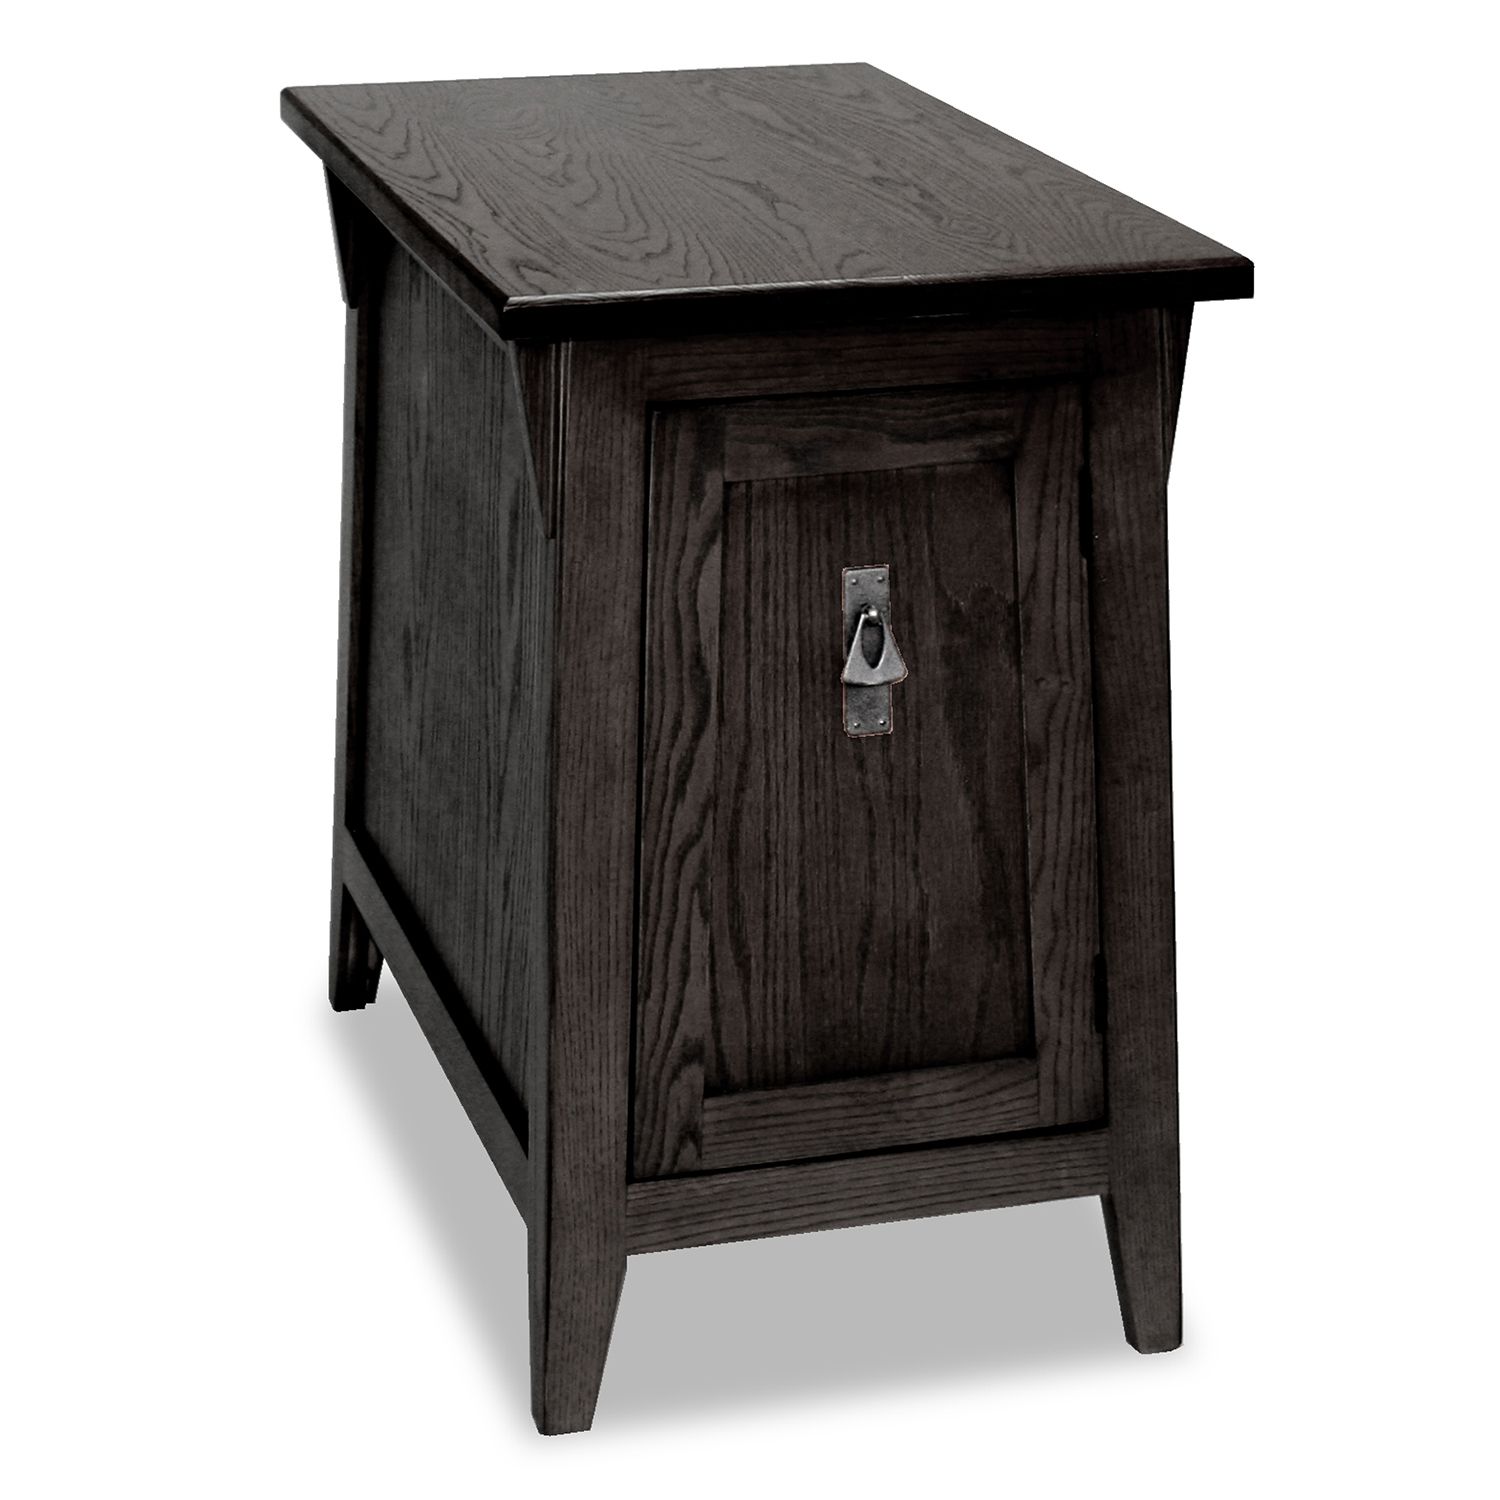 Image for Leick Furniture Mission Cabinet End Table at Kohl's.